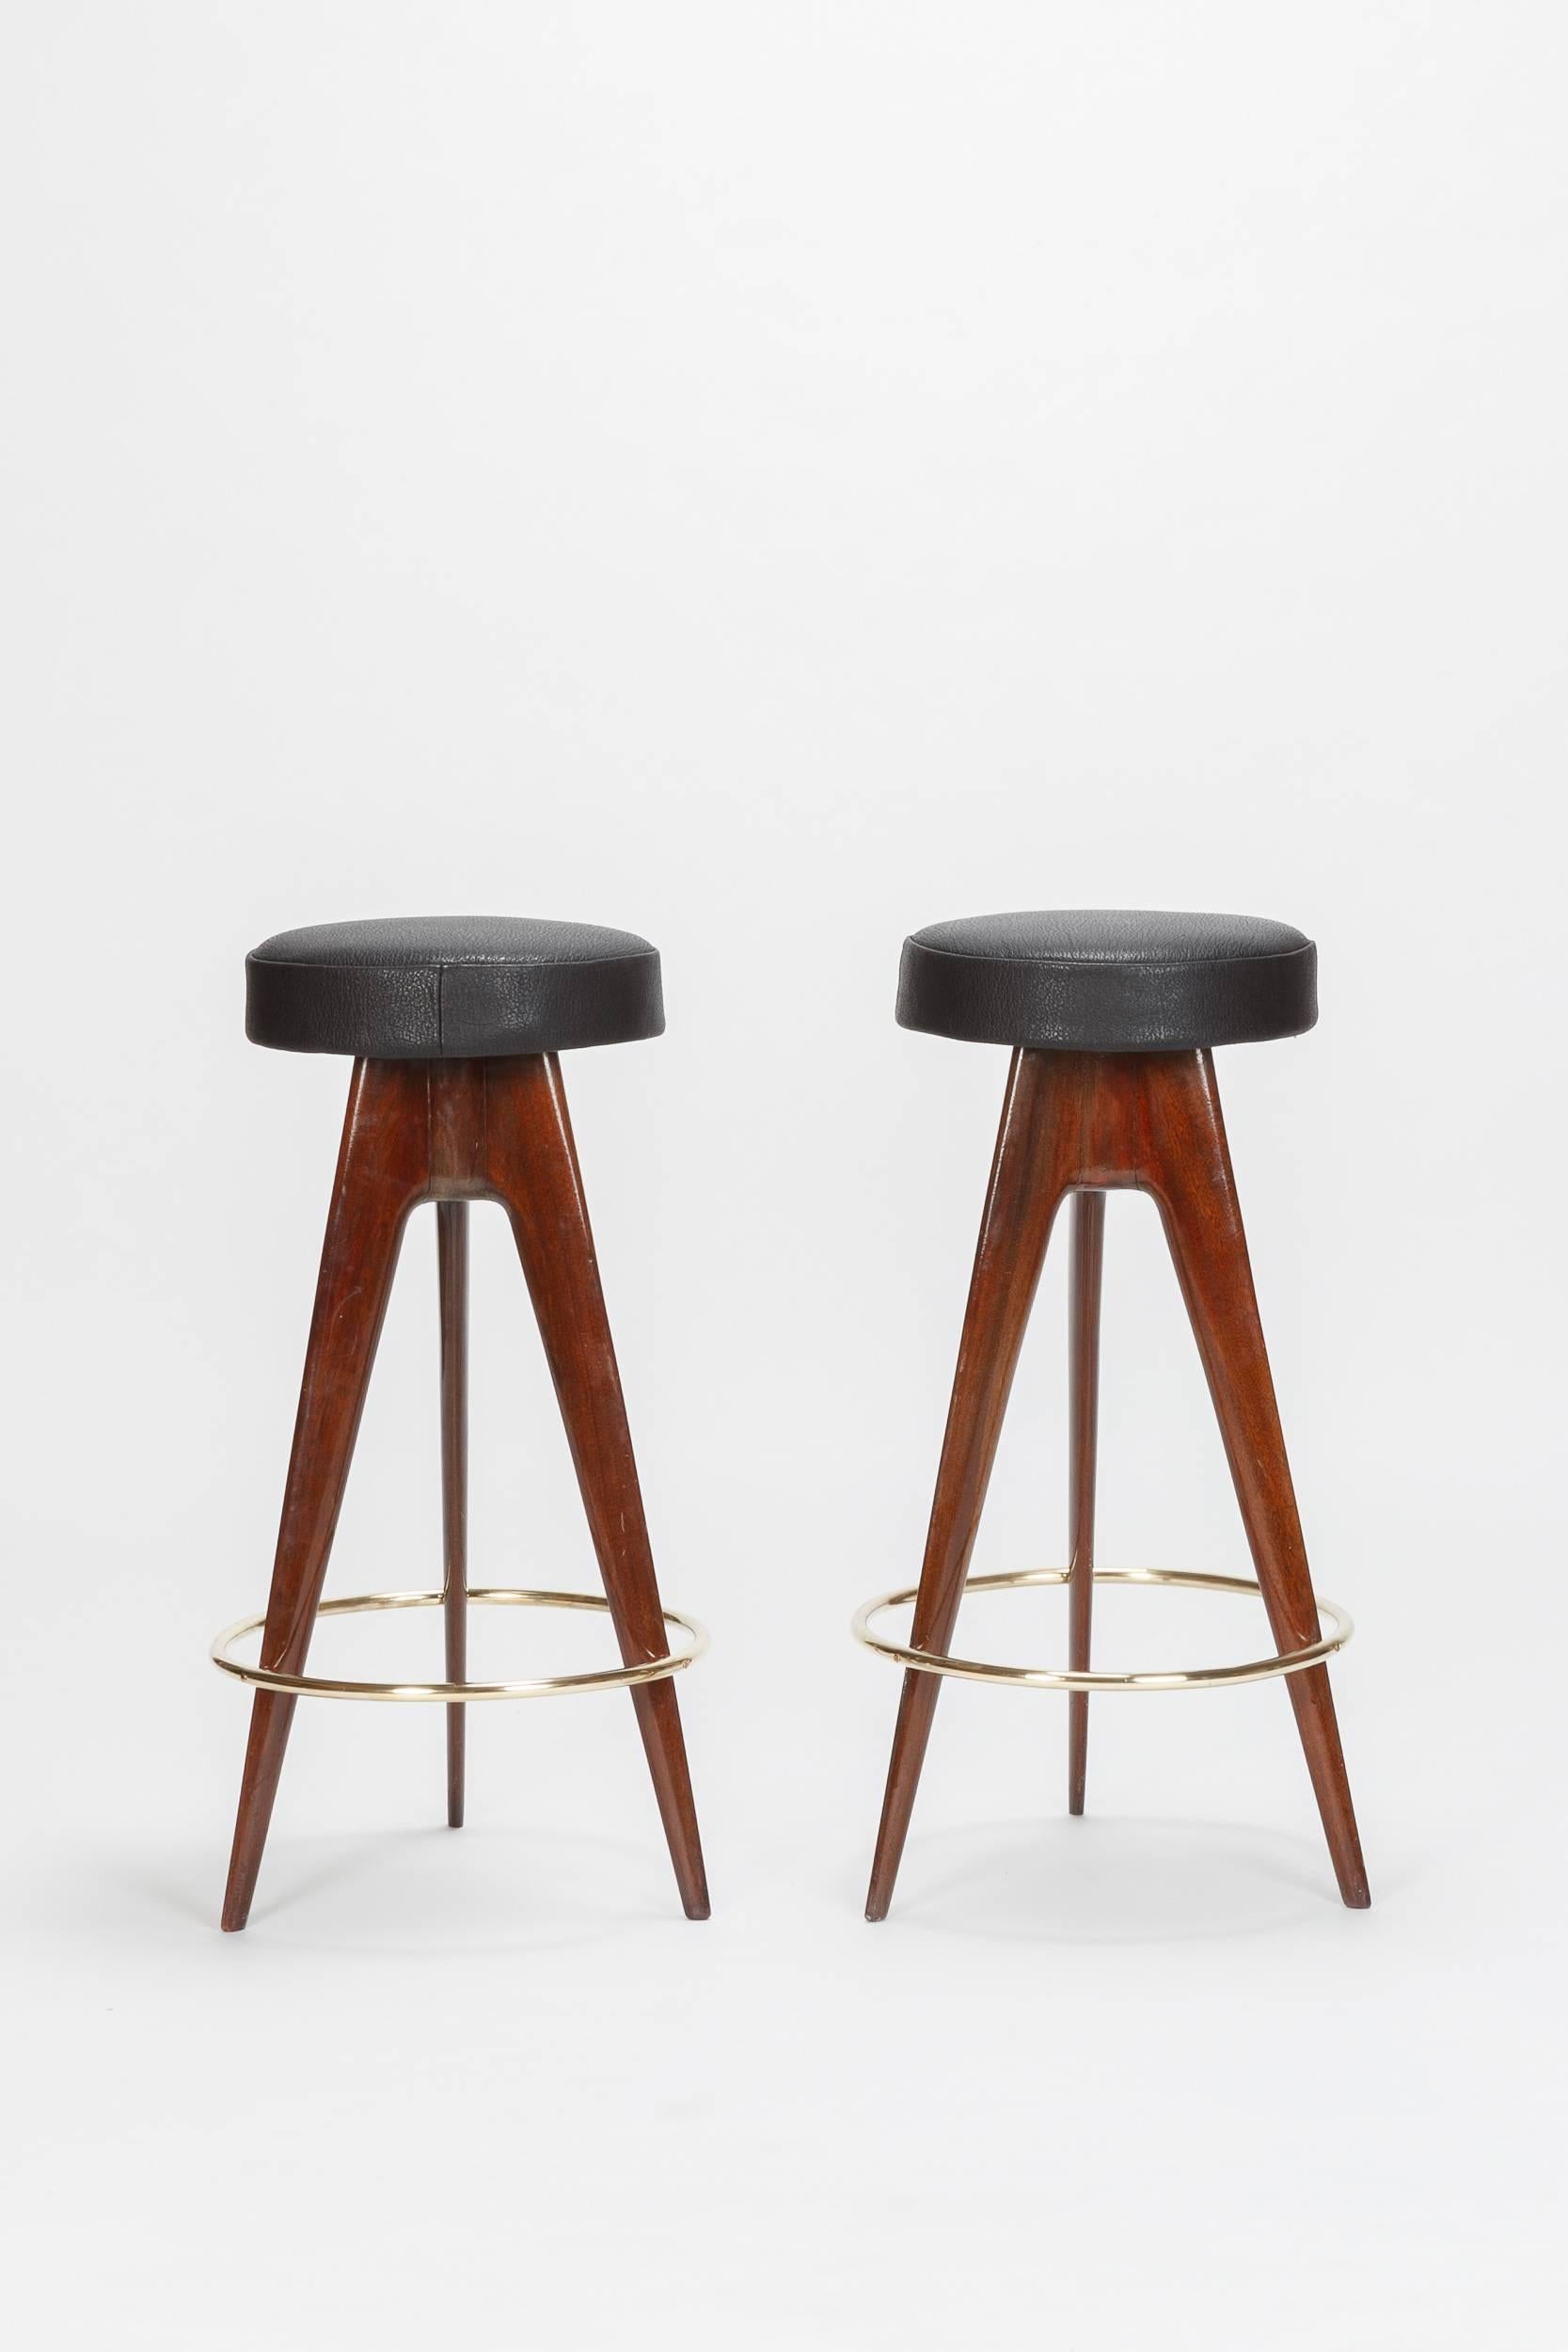 Pair of very rare Italian bar stool manufactured in the 1950s and attributed to Ico Parisi. Tripod base in mahogany, very elegant shape. New cover made of black horse leather (diameter 34.5cm), everything newly polished. Beautiful vintage condition!